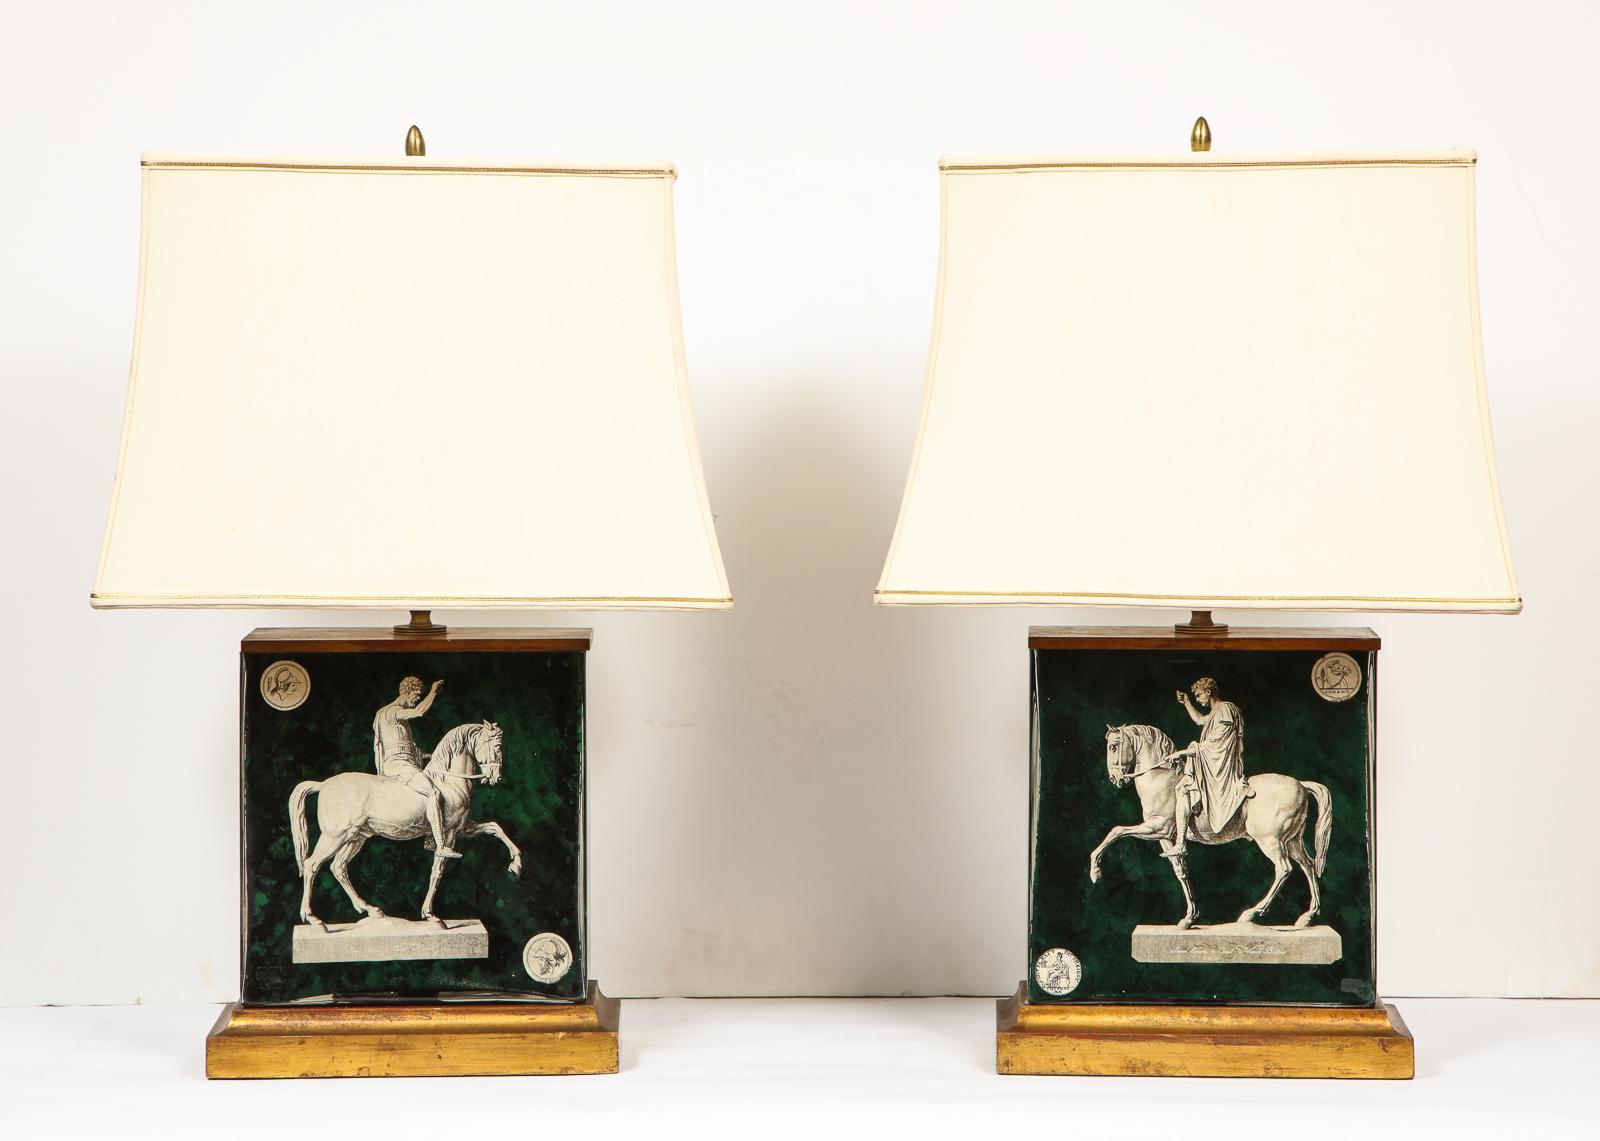 Fantastic pair of midcentury Italian green molded glass lamps, with horses, after the antique, attributed to Piero Fornasetti, circa 1950, Milan.

Mounted on giltwood.

With original shades.

Very decorative lamps, very high quality. 

Measures: